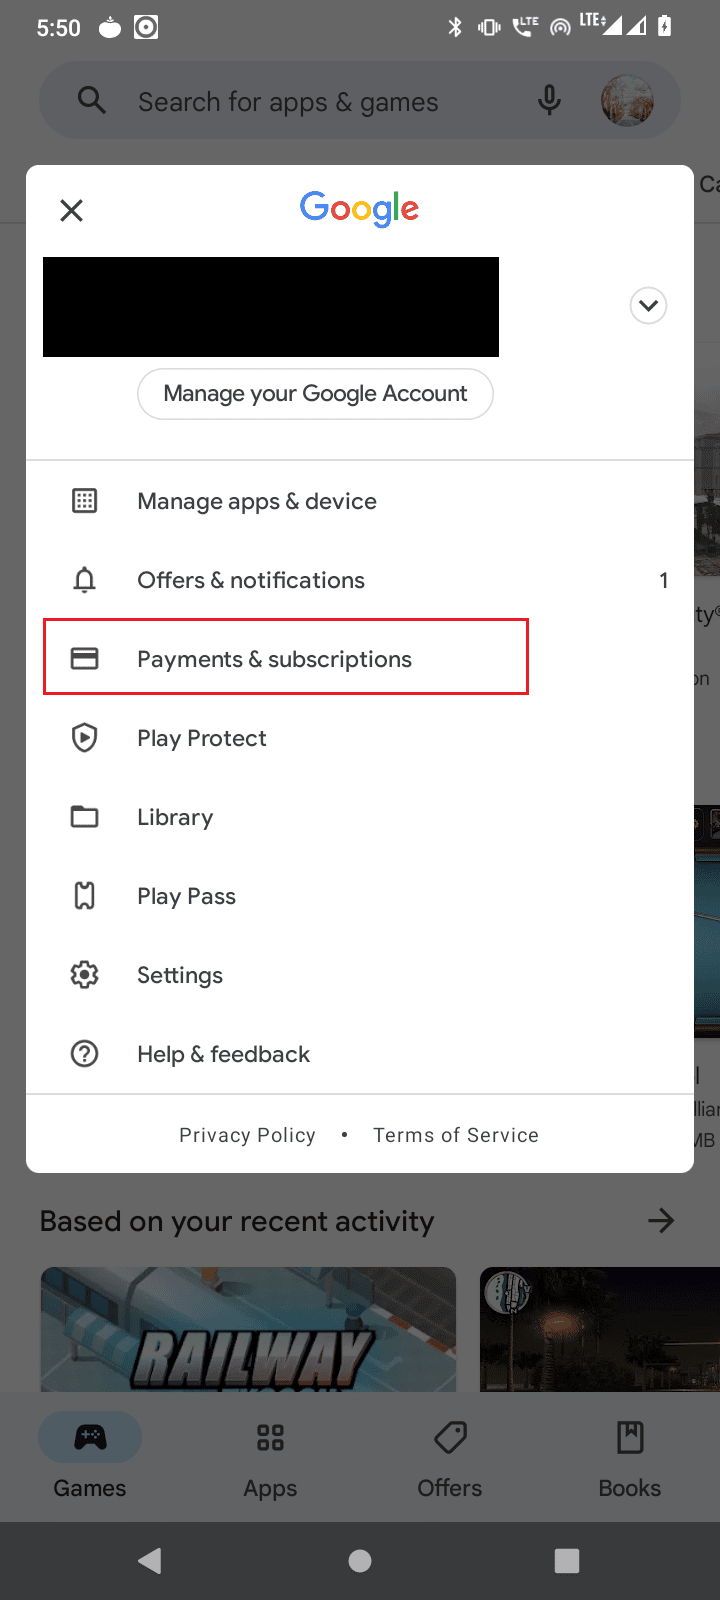 tap payments and subscriptions